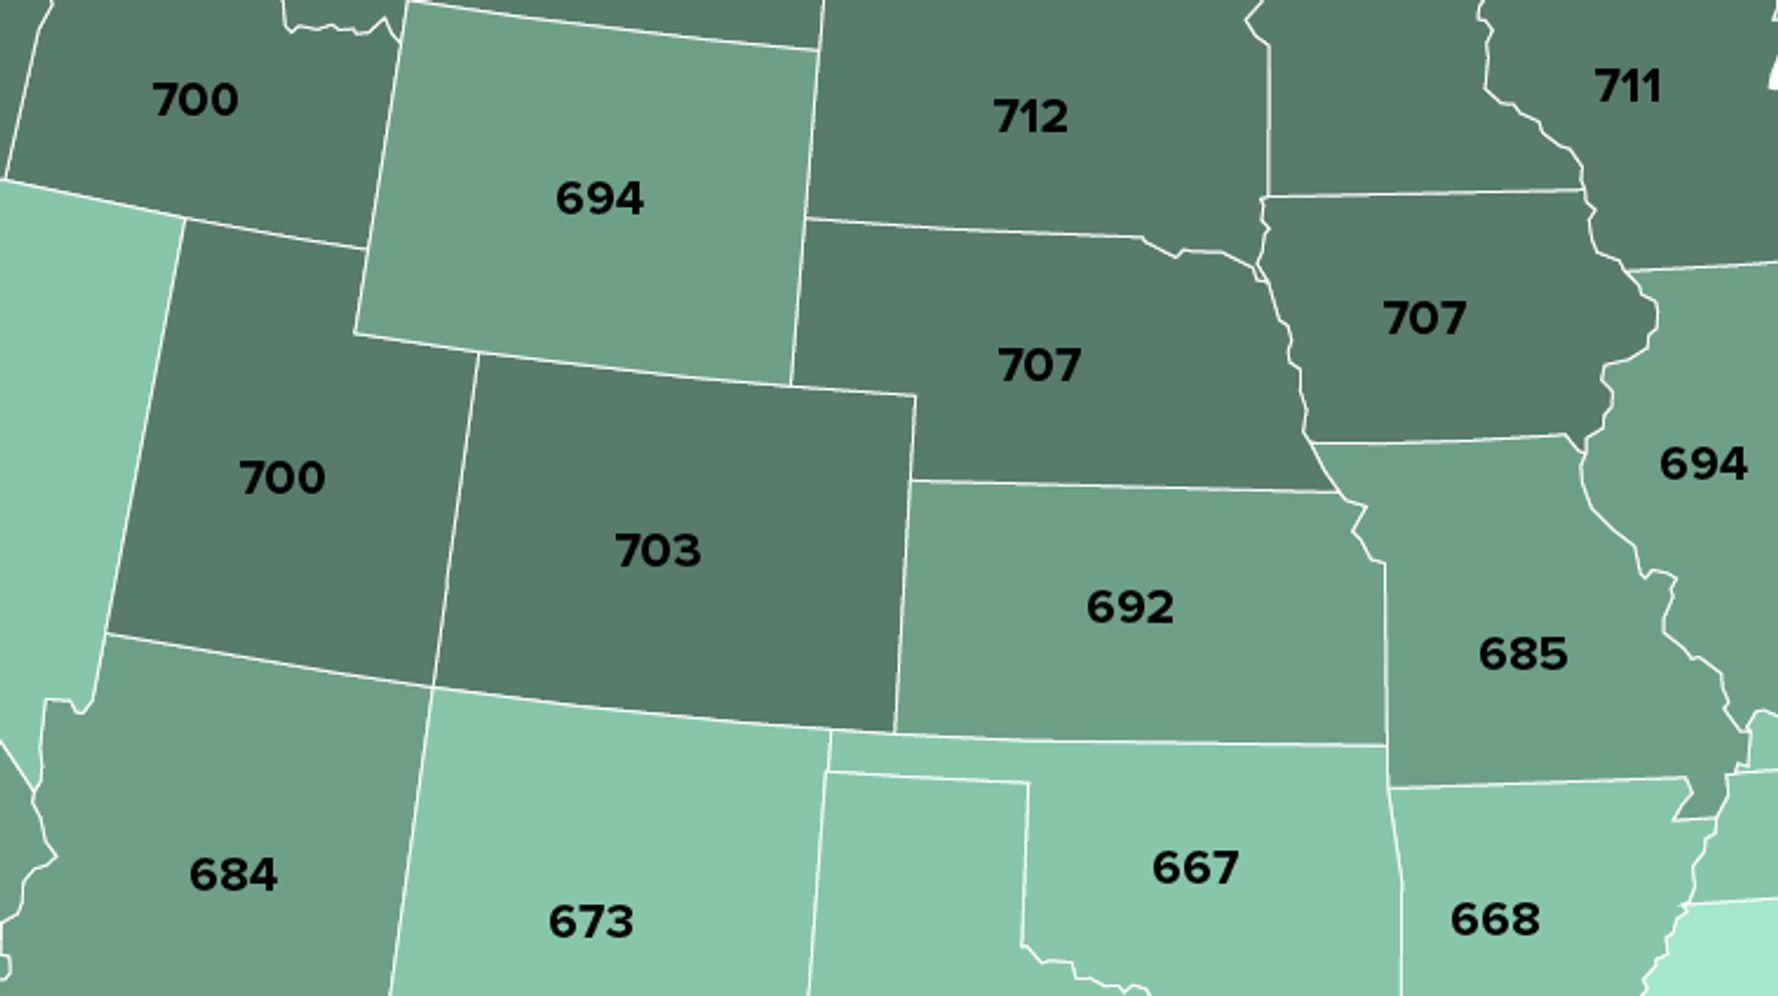 What's The Average Credit Score In America By State? This Map Breaks It Down.